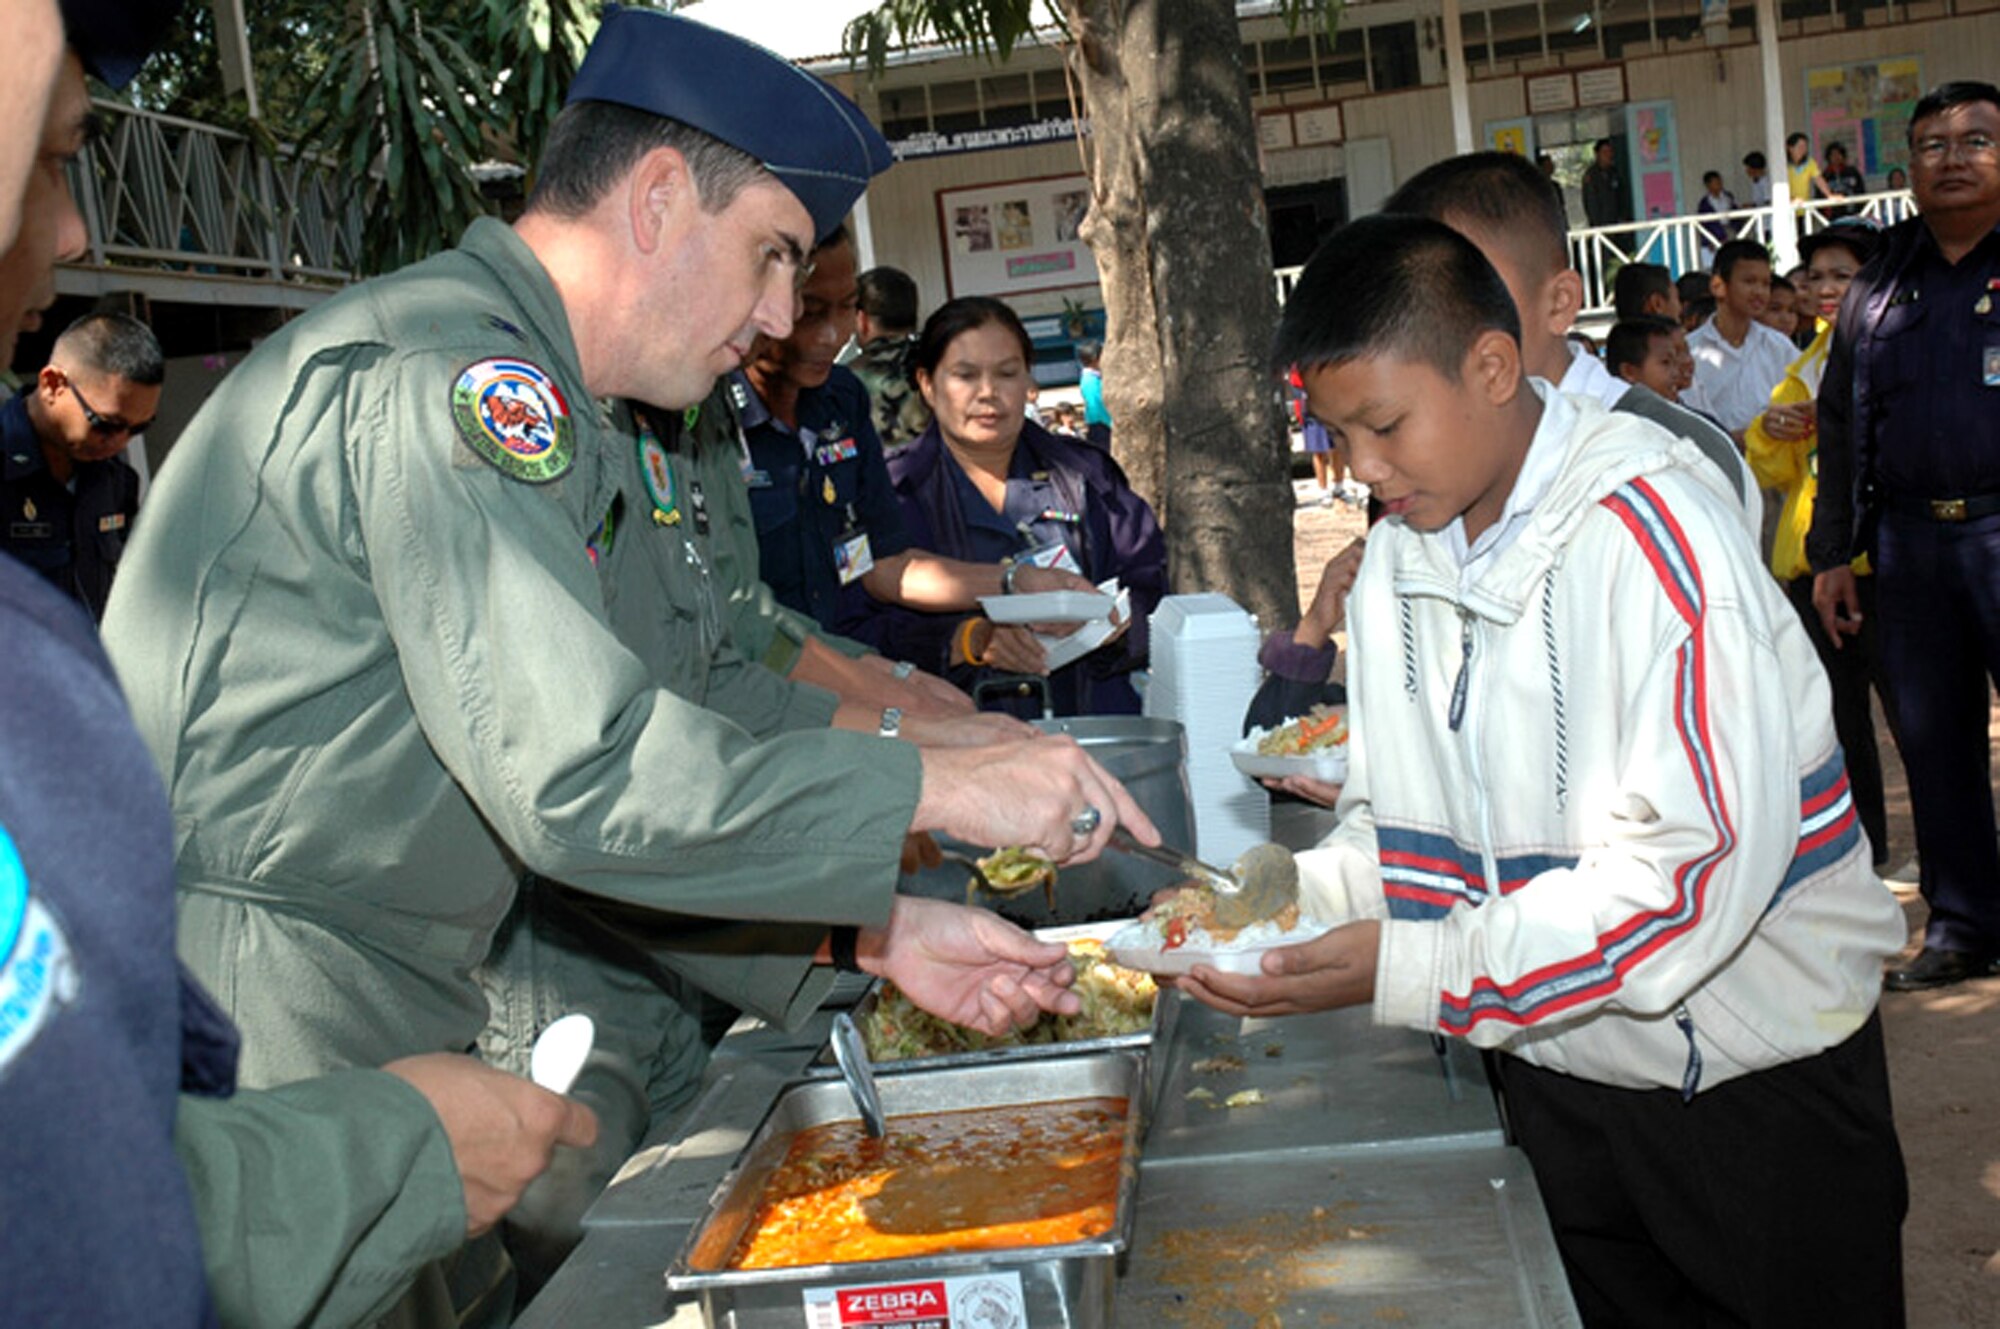 Col. Vincent Farrell serves a spoonful of curry to young Thai students from Ban Chaimongkon School Jan. 30 in Korat, Thailand. Military members from the United States, Thailand and Republic of Singapore took part in a humanitarian mission at the school as part of the multilateral exercise. Colonel Farrell is the 13th Air Force director of air, space and information operations and Air Force working group leader for Exercise Cope Tiger 2007. (U.S. Air Force photo/Staff Sgt. Betty Squatrito-Martin)